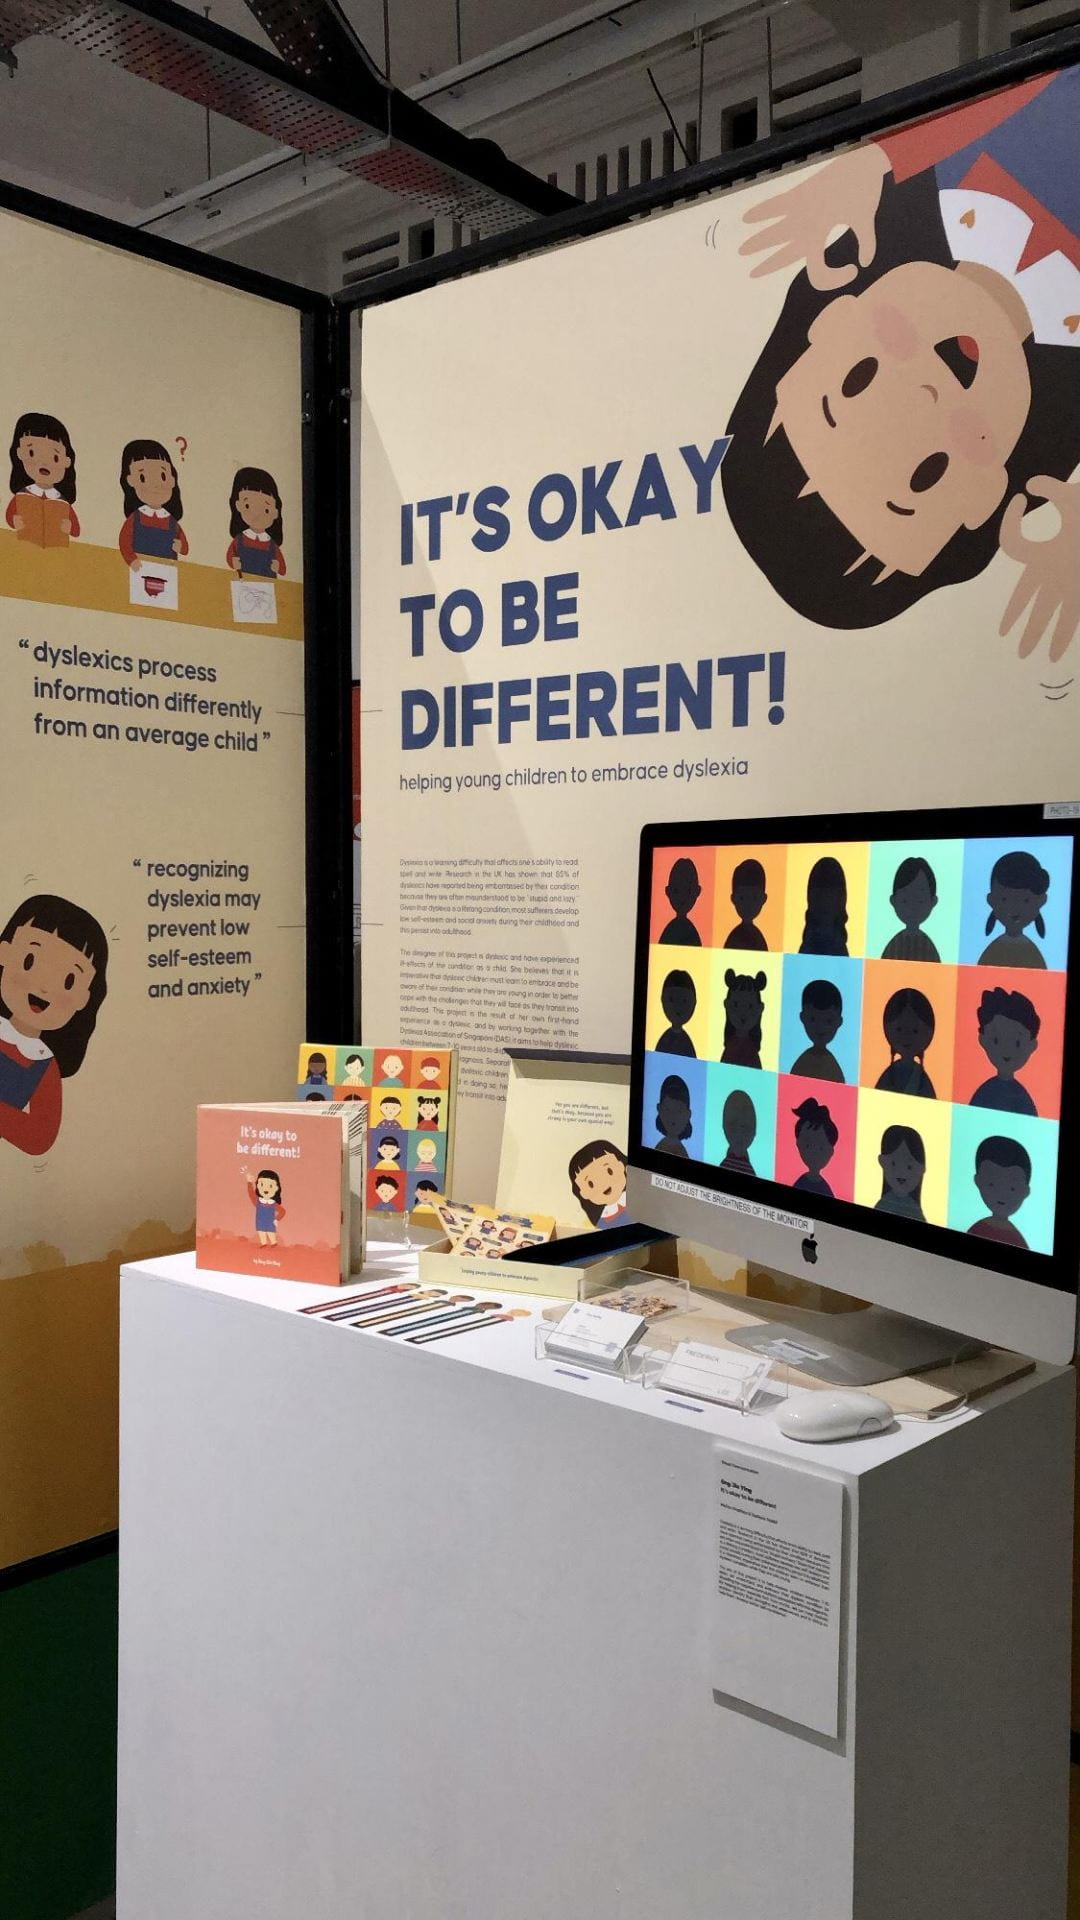 It's okay to be different! - helping young children to embrace dyslexia at NTU ADM Portfolio